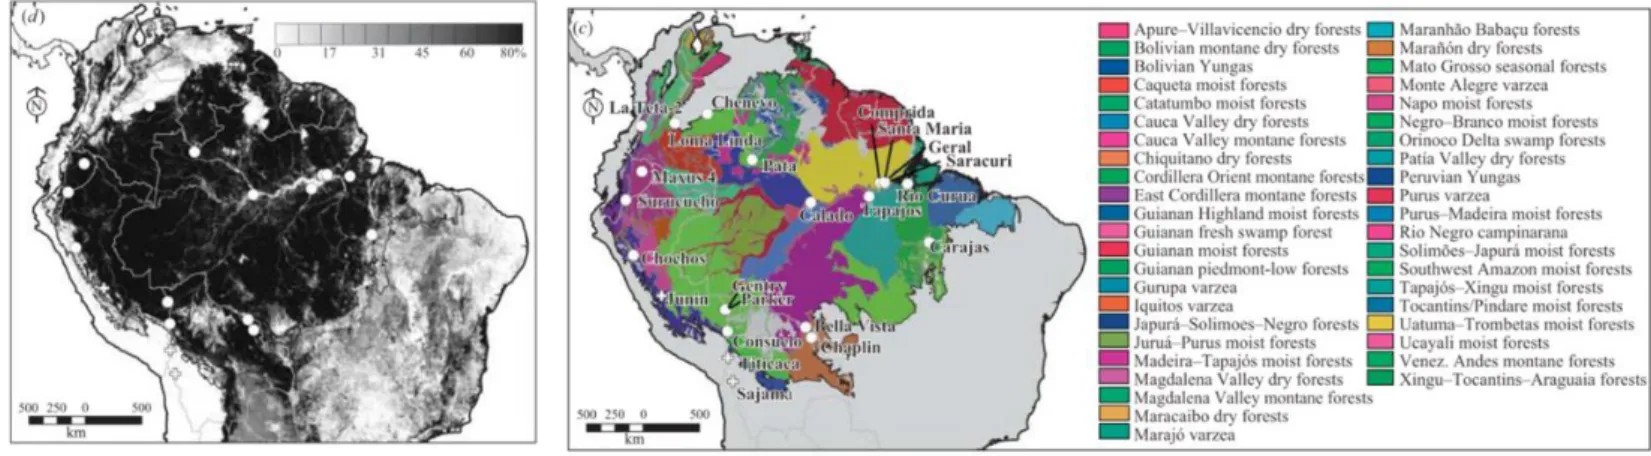 Figure 2 : Major Biodiversity hotspots (red) and wilderness areas (green). From Cincotta et al